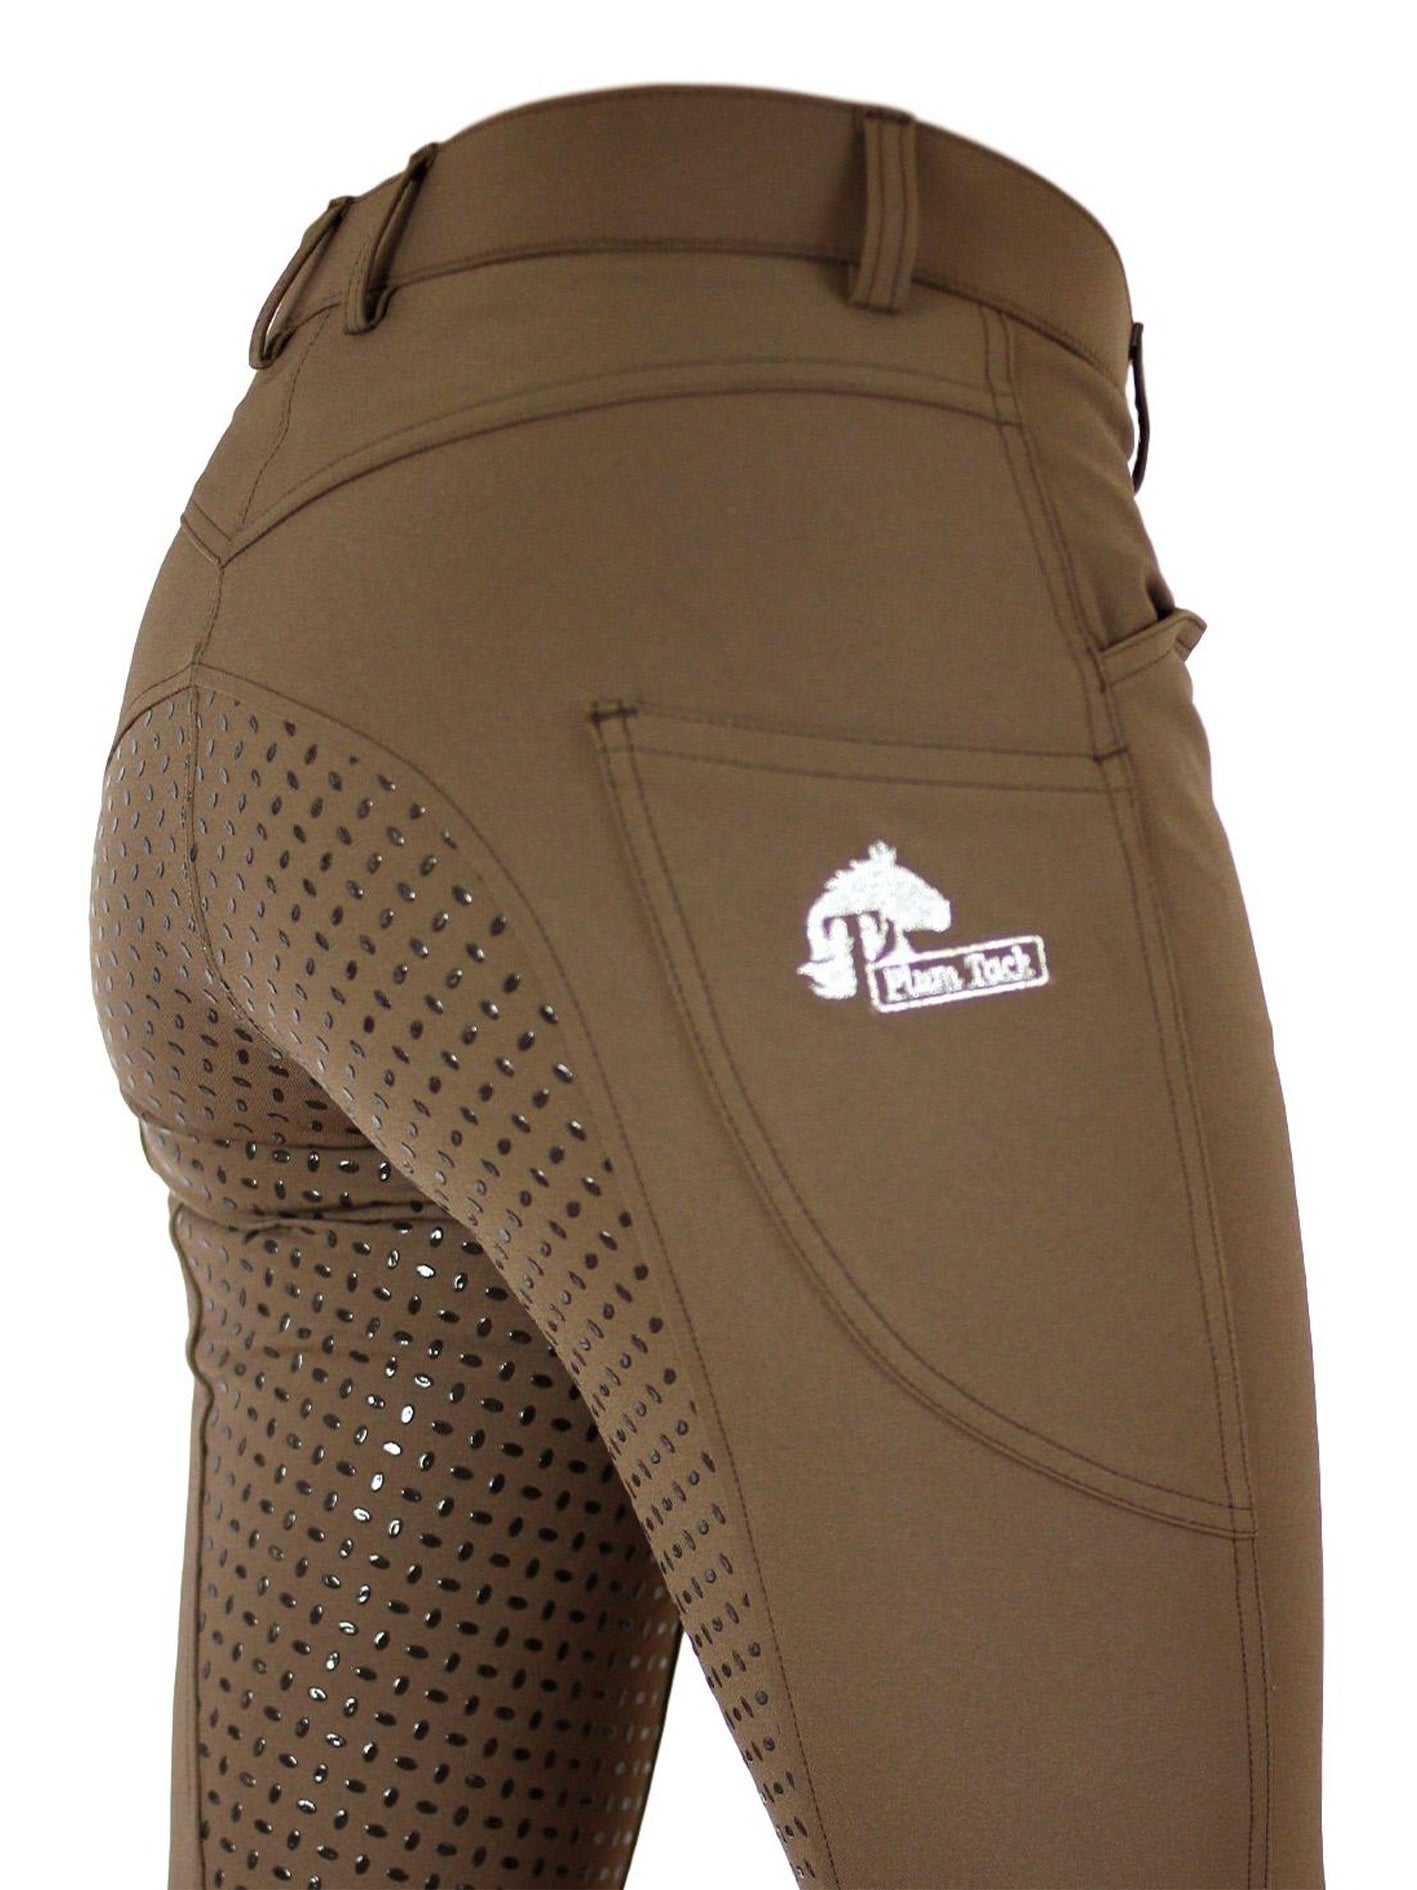 Bamboo breeches in Brown - Final run out, Last sizes